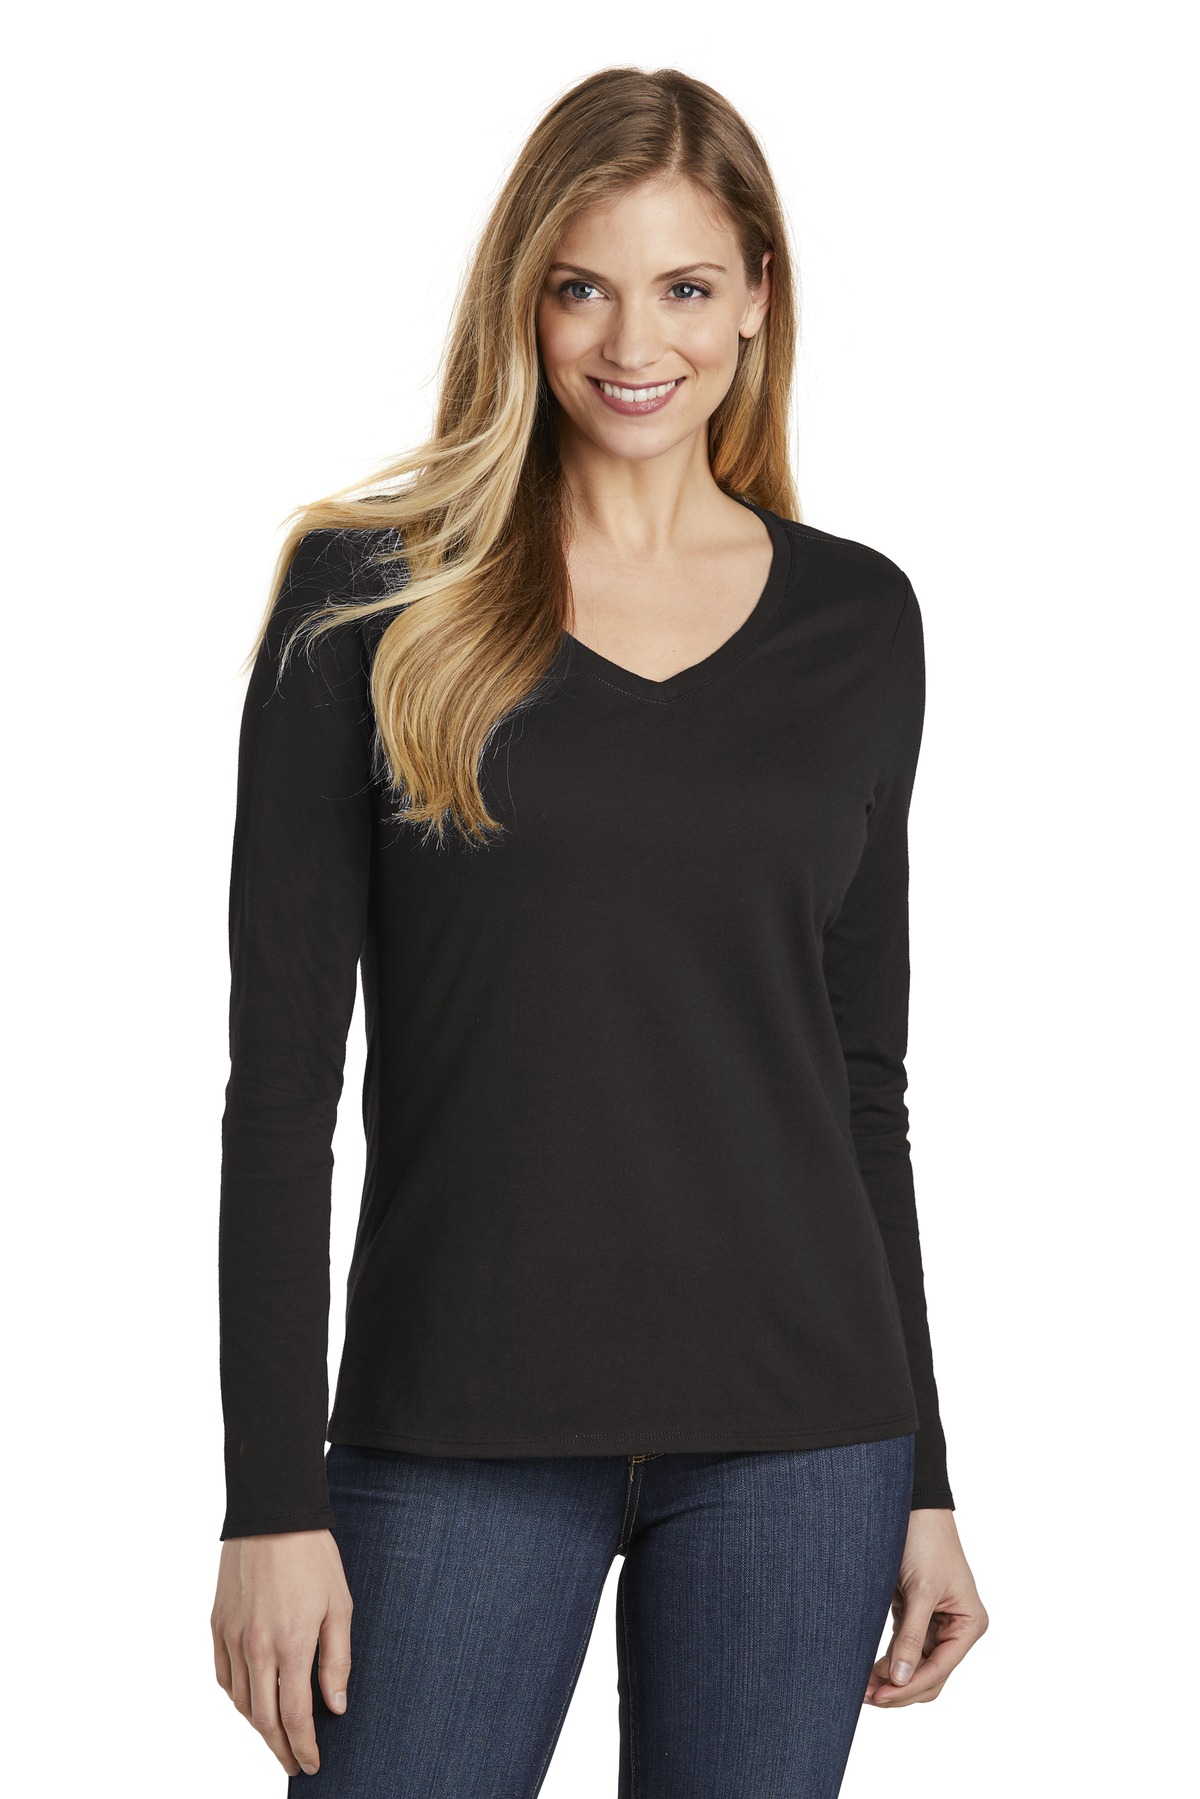 District  Womens Very Important Tee  Long Sleeve V-Neck. DT6201